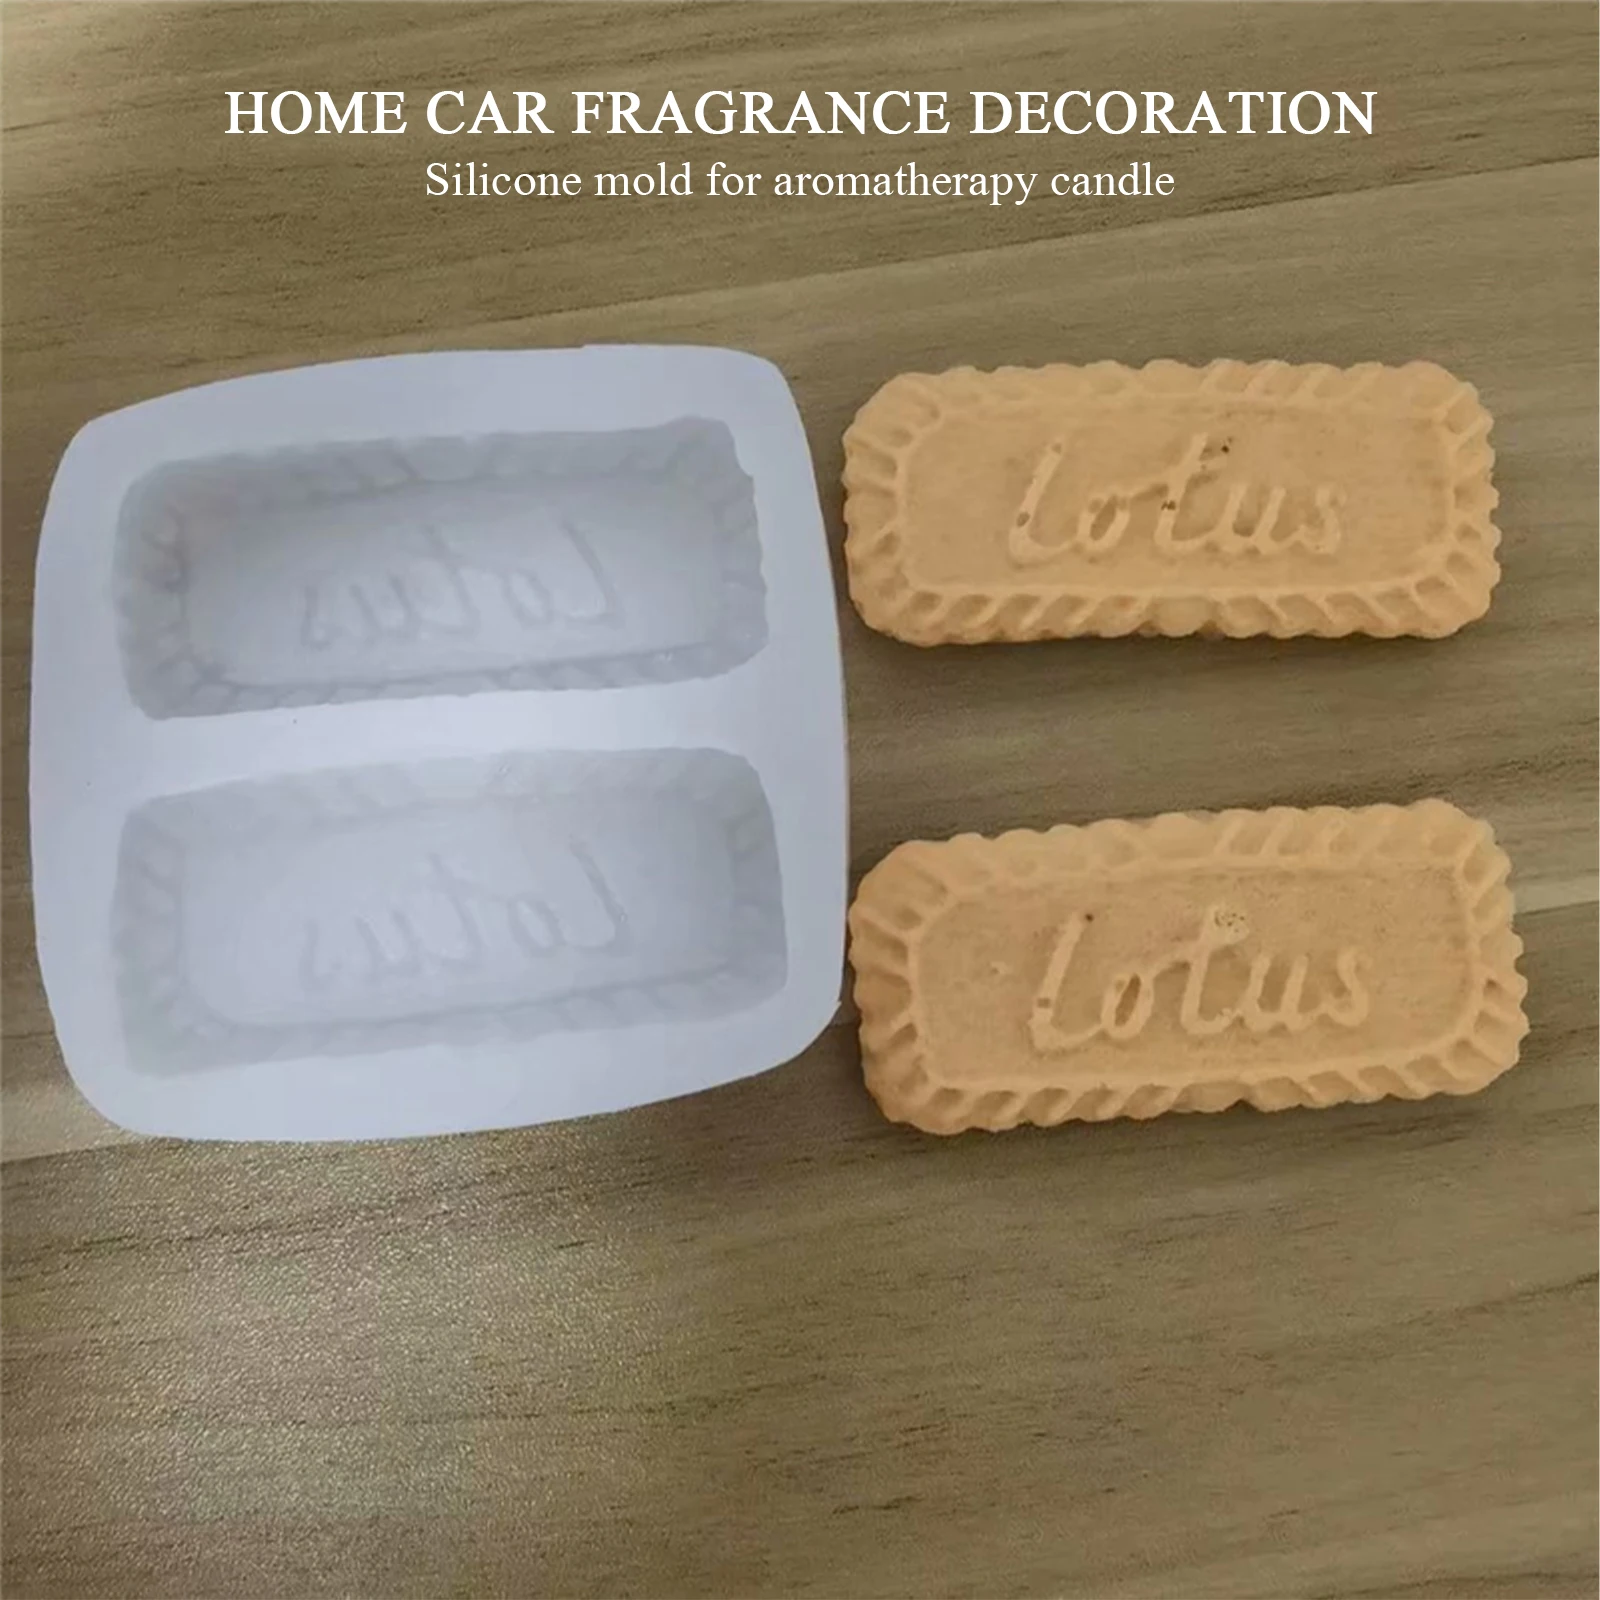 

3D Silicone Biscuit Shape Candle Mold Home Cars Aromatherapy Decor DIY Crafts Biscuit Chocalate Baking Mould Handmade Tool